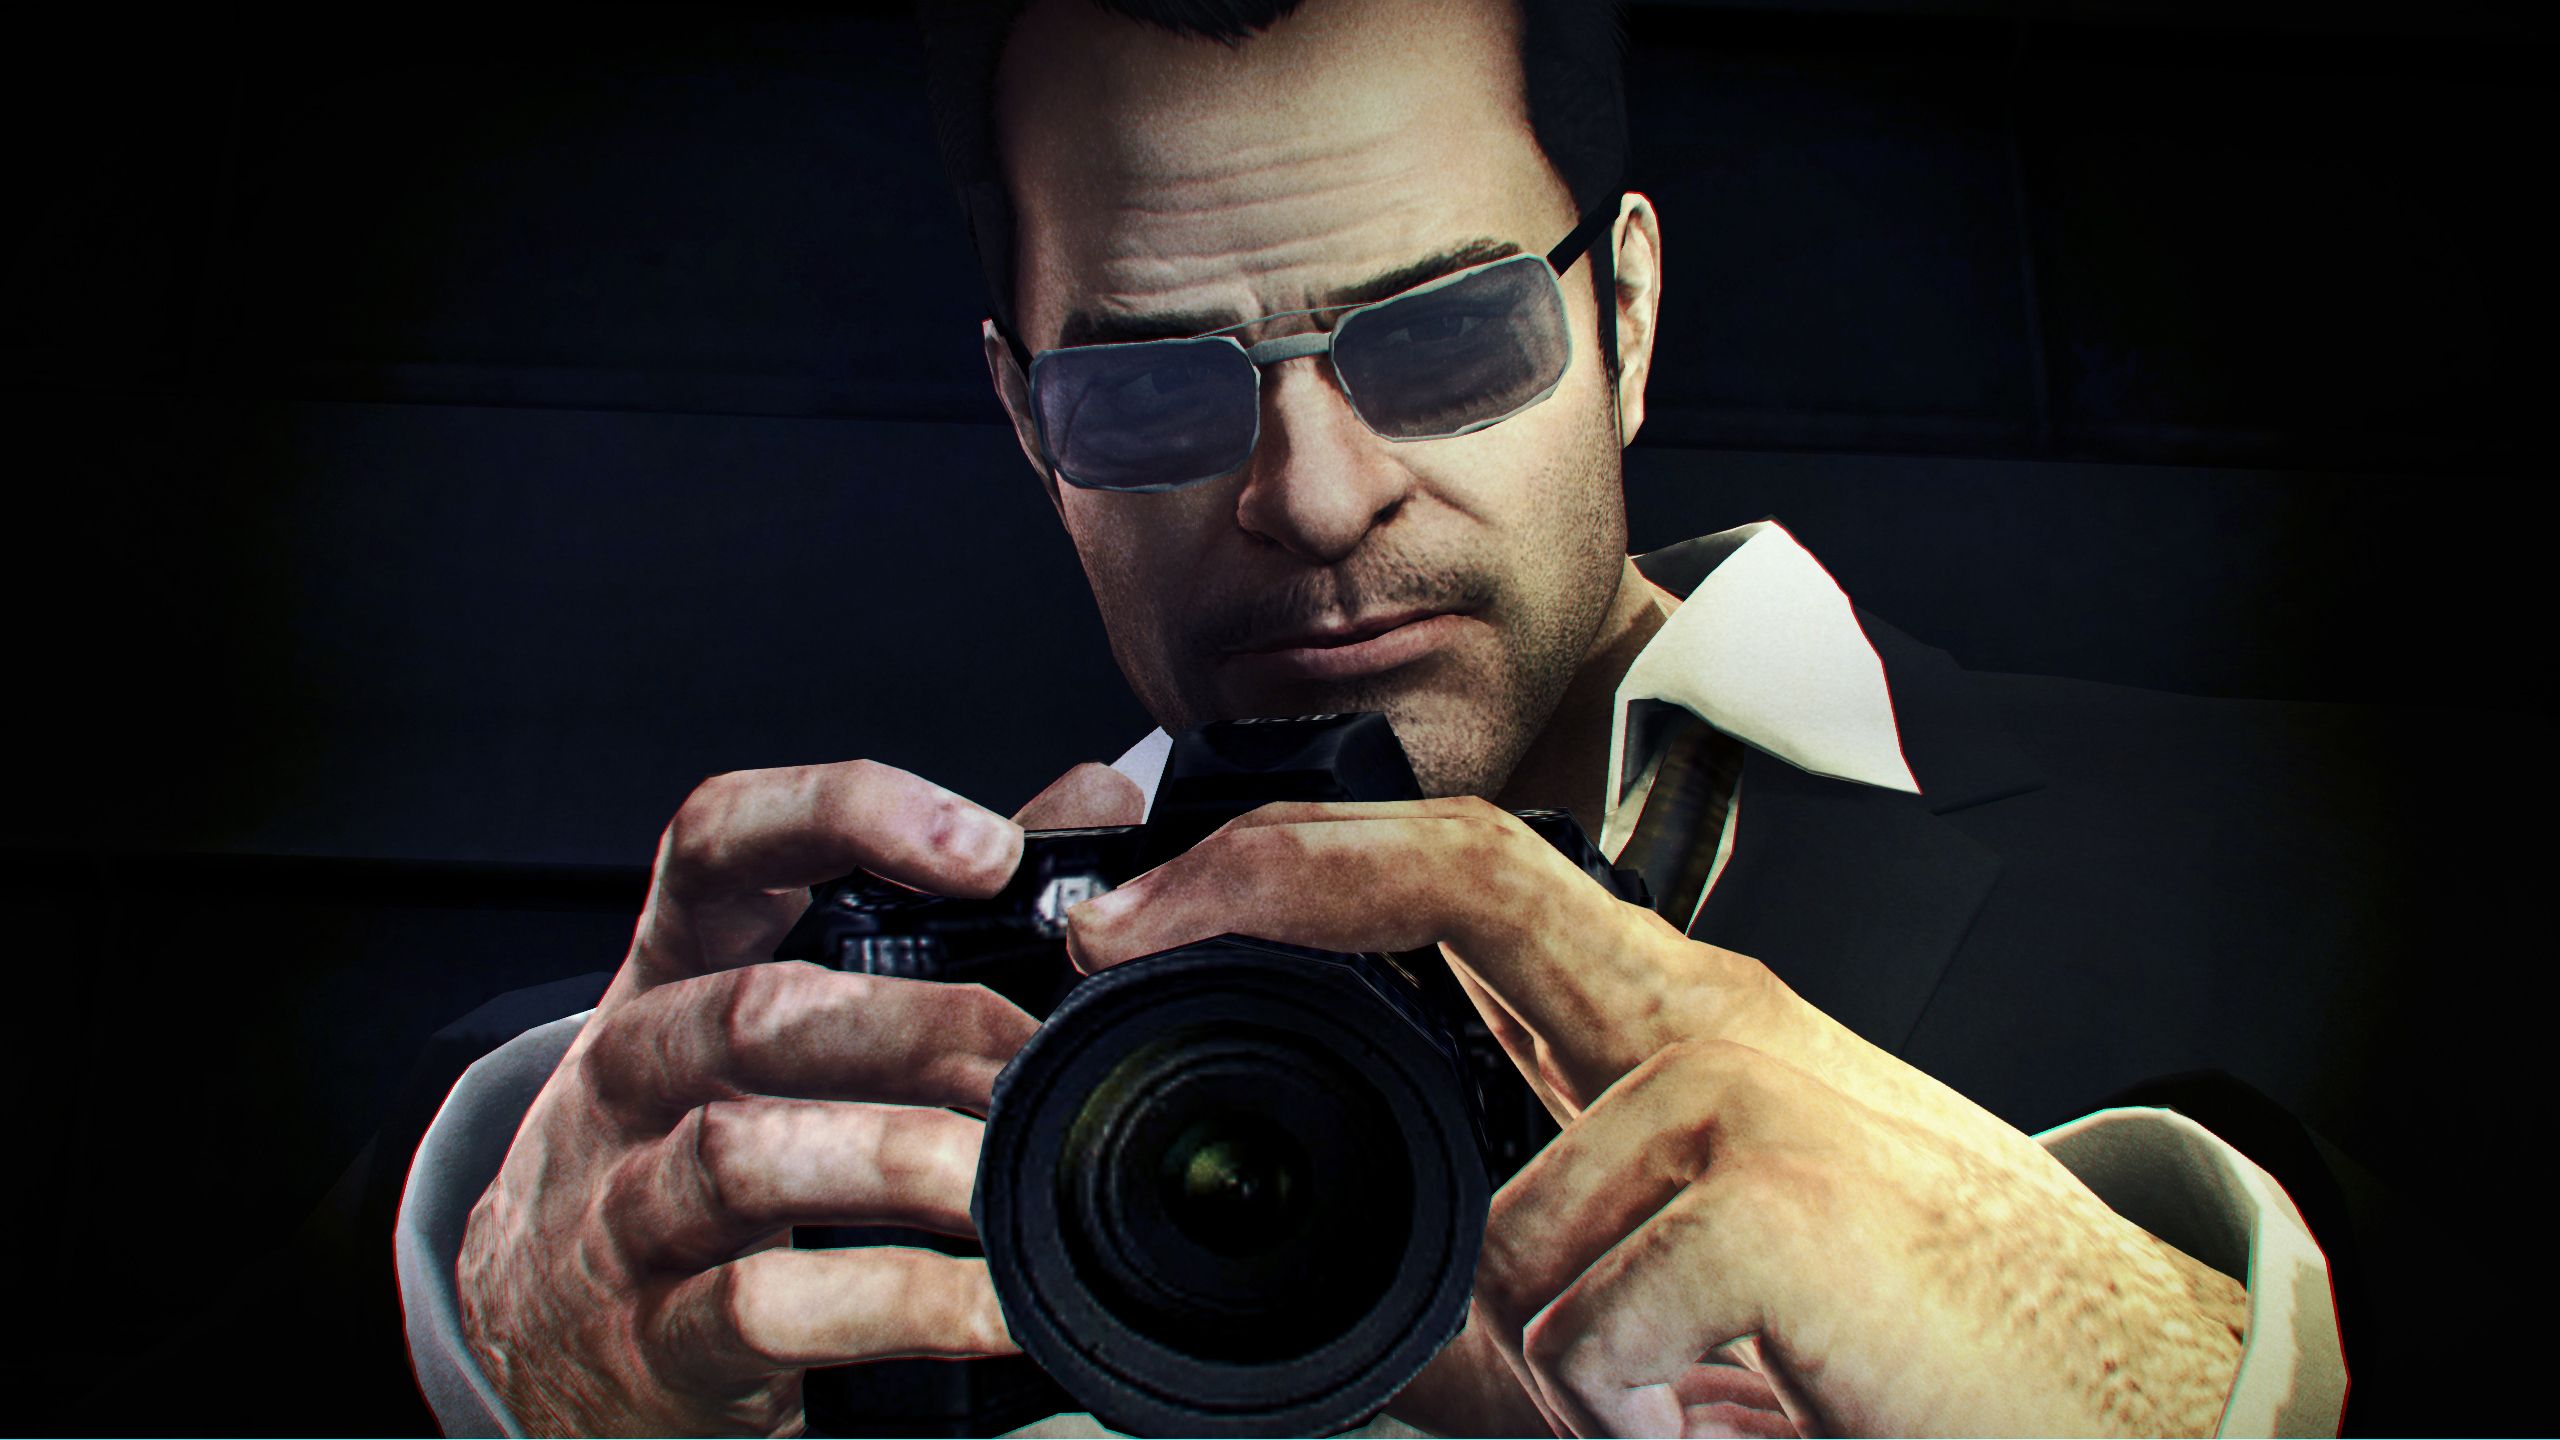 Dead Rising 2 - Off The Record DLC - Image 7